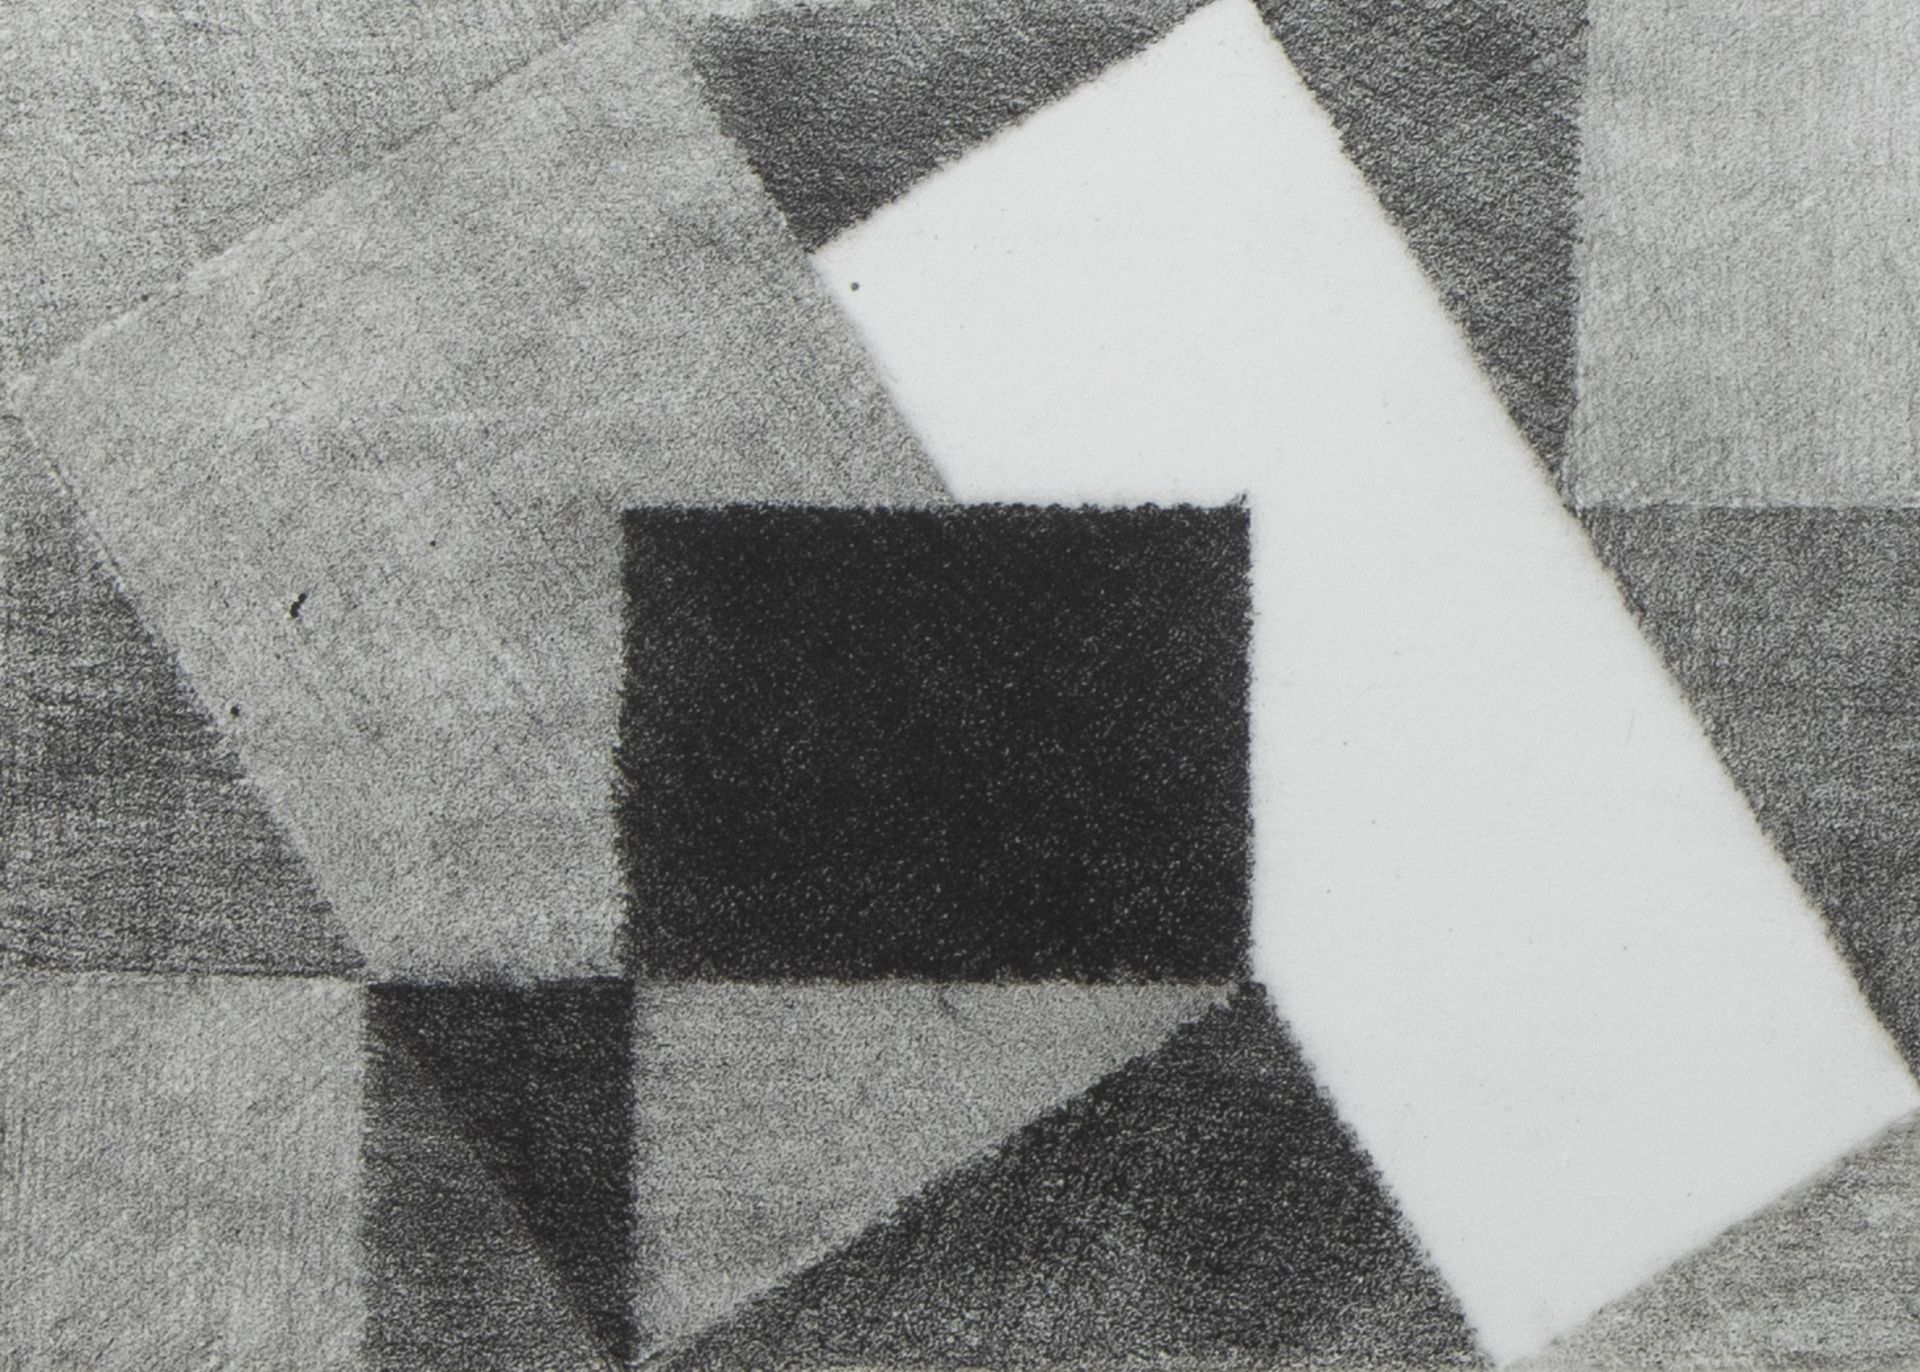 Noël VERMEULEN (1917-1989), etching Untitled, E.A. 1/9, signed and dated '84